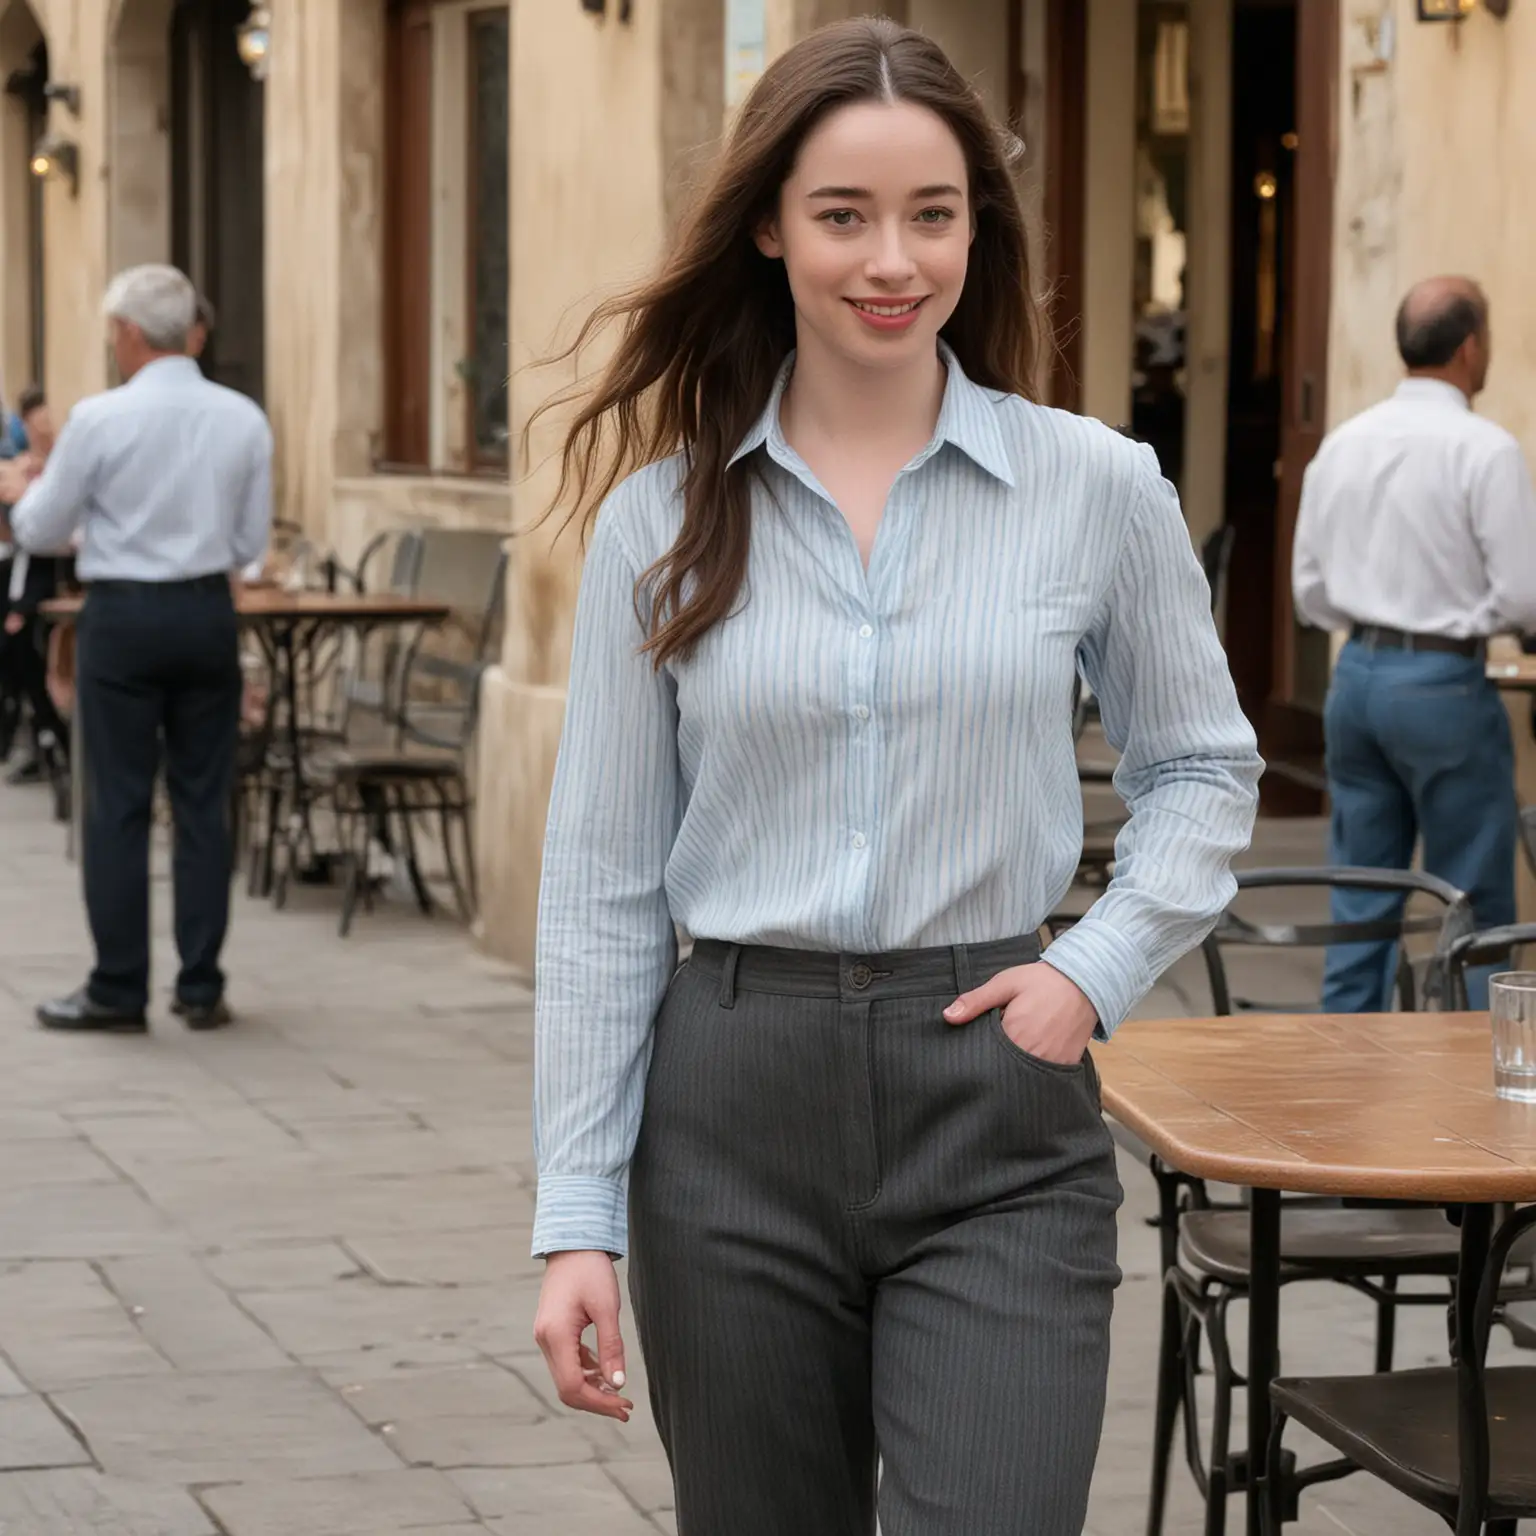 Eager Anna Popplewell at Caf Terrace Crushes on GrayHaired Andean Man